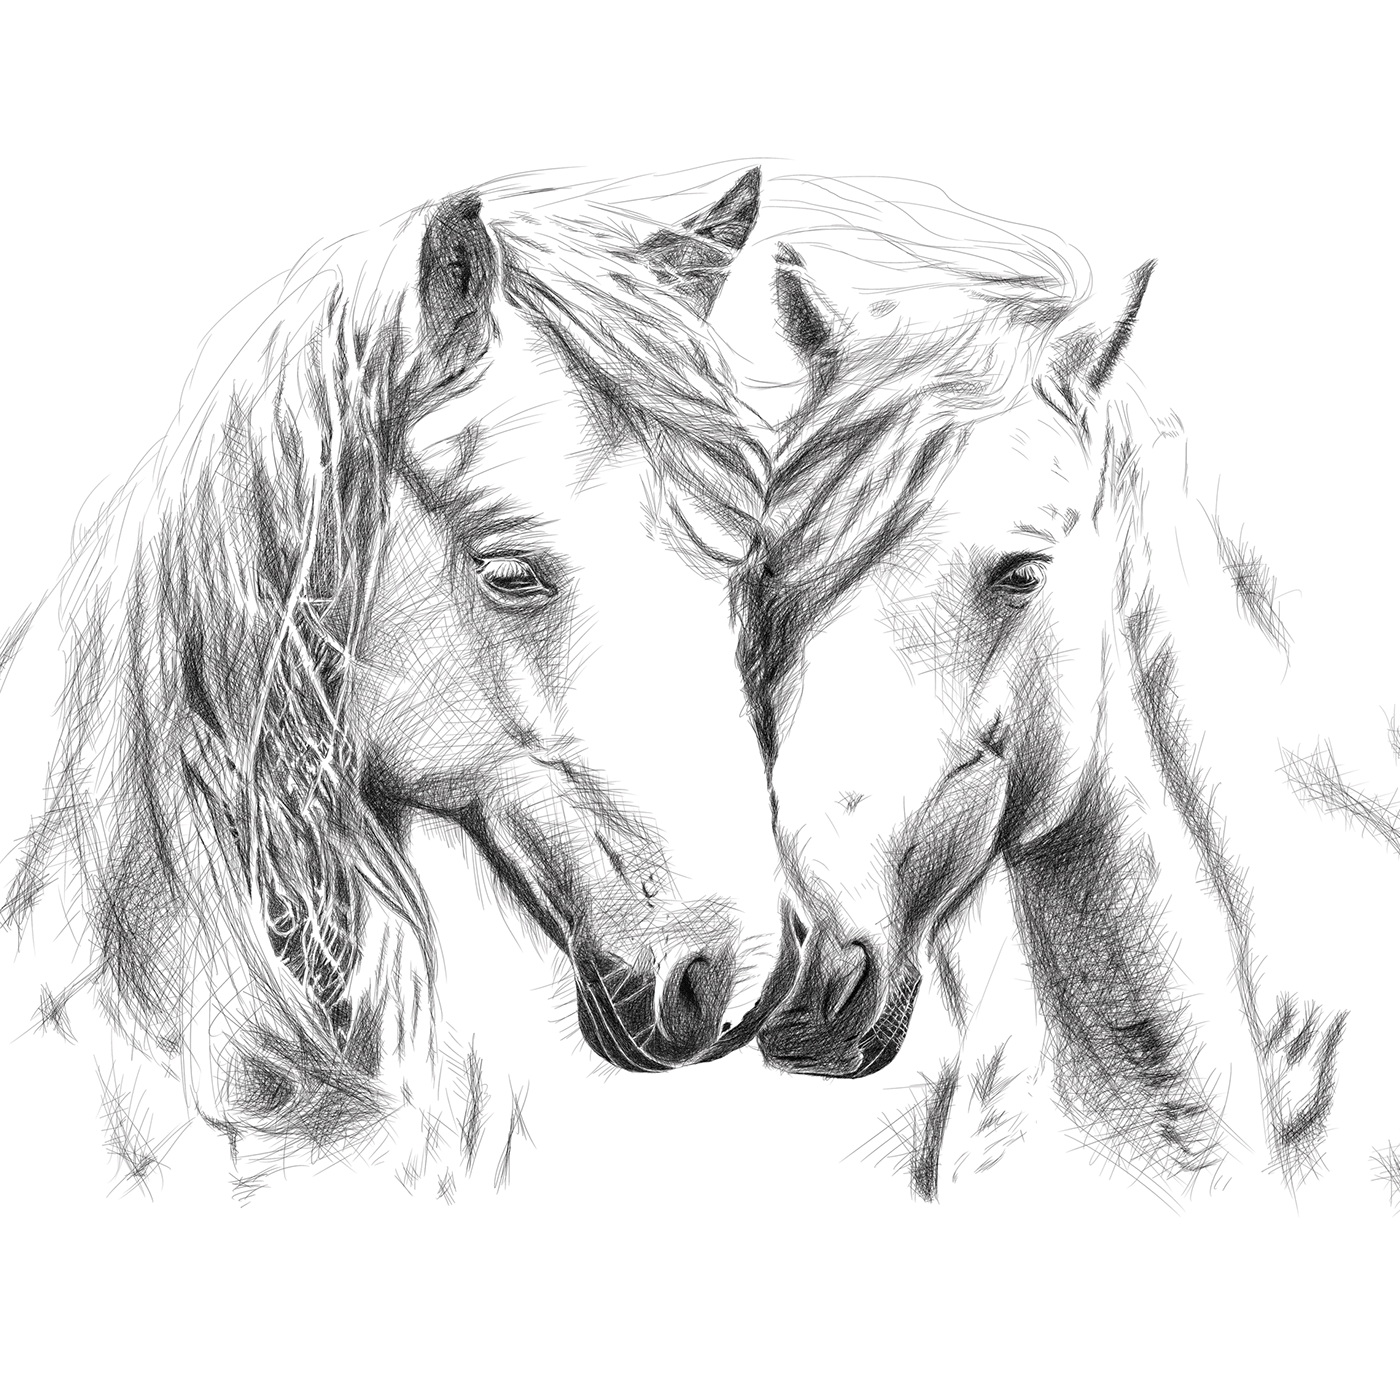 ILLUSTRATION  Drawing  lines etching horses engraving sketch Detailed illustration Pen and in